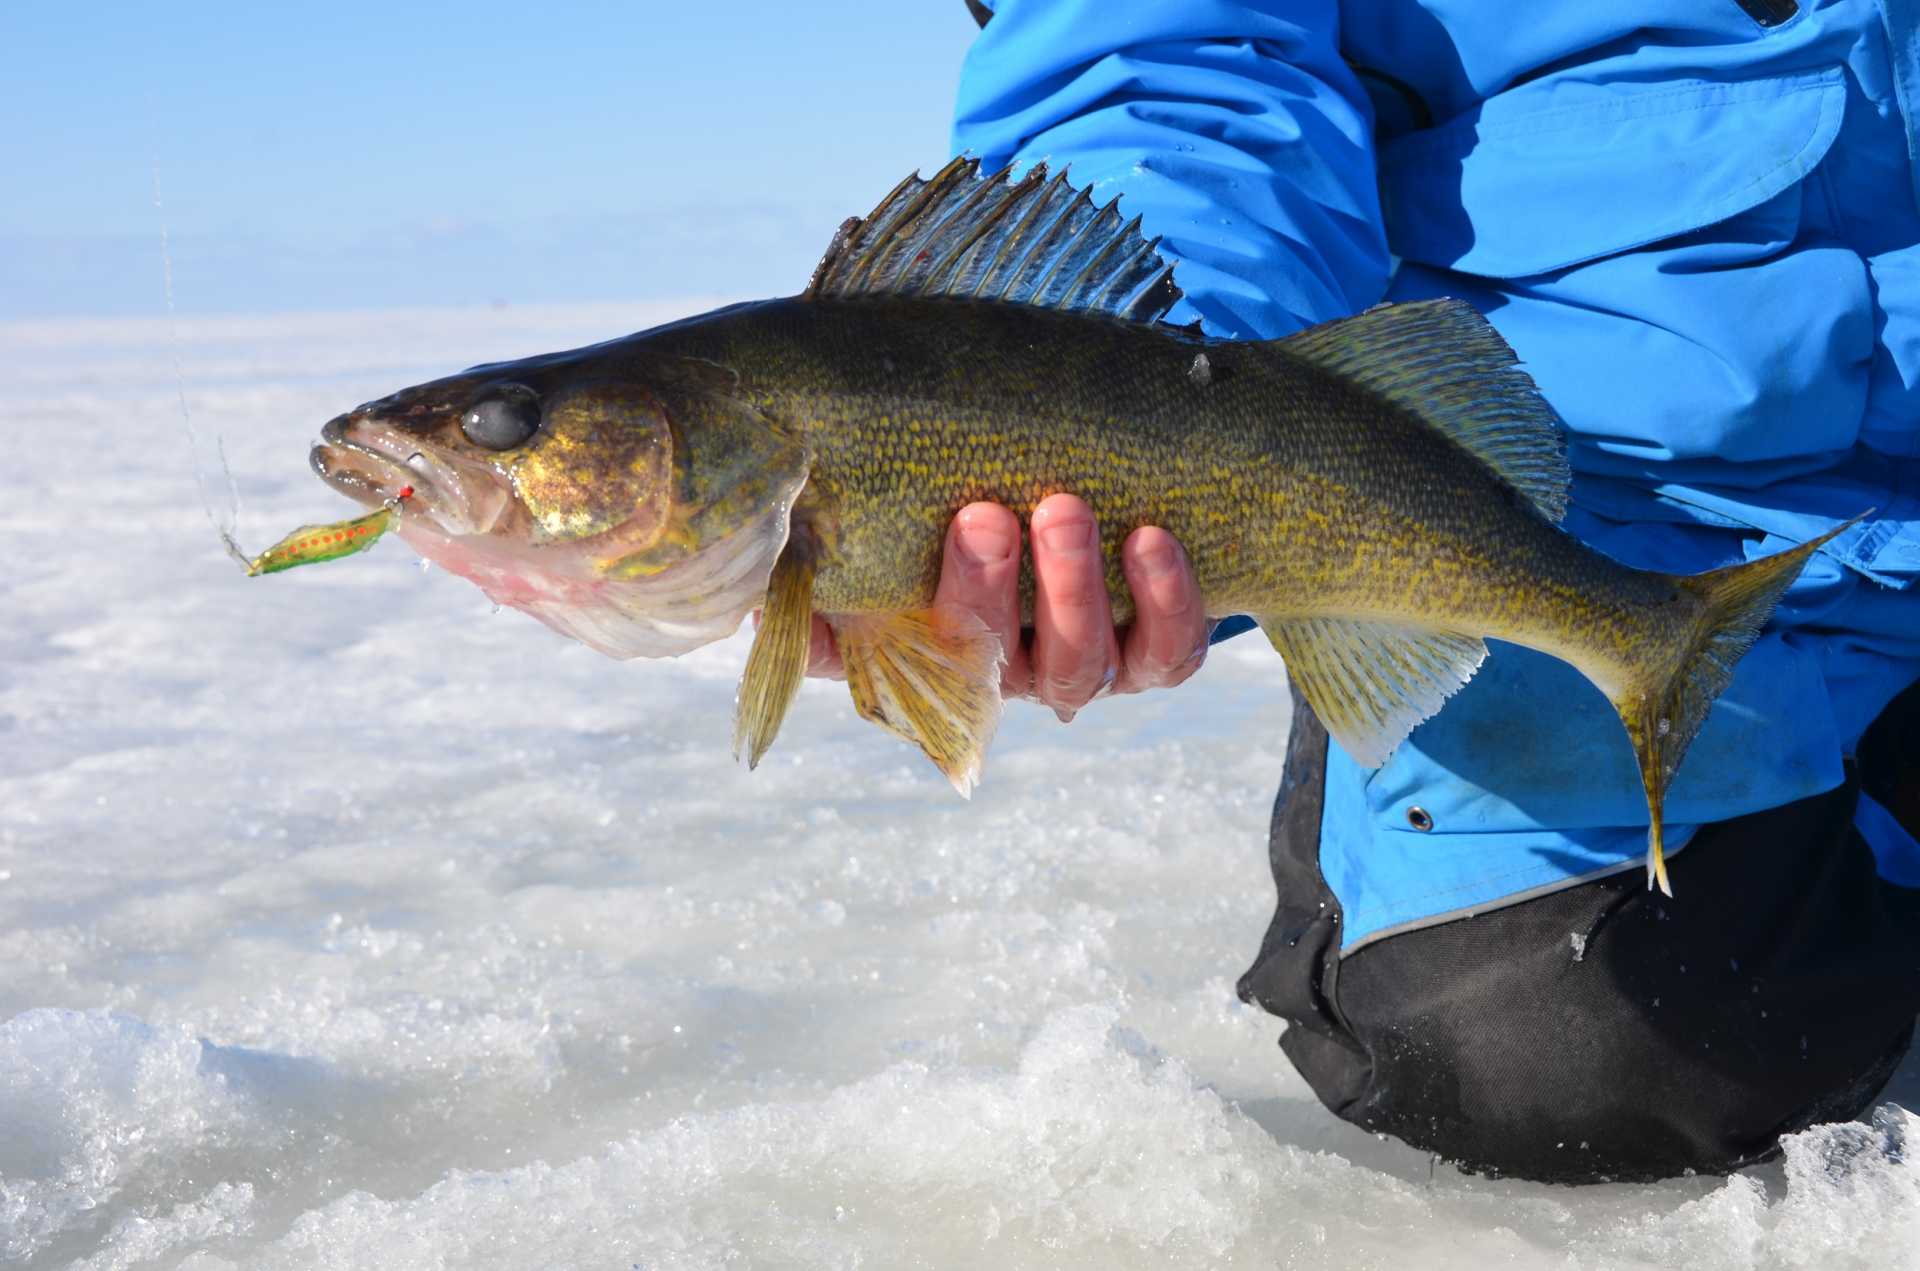 March ice fishing for walleyes and pike on Lake of the Woods